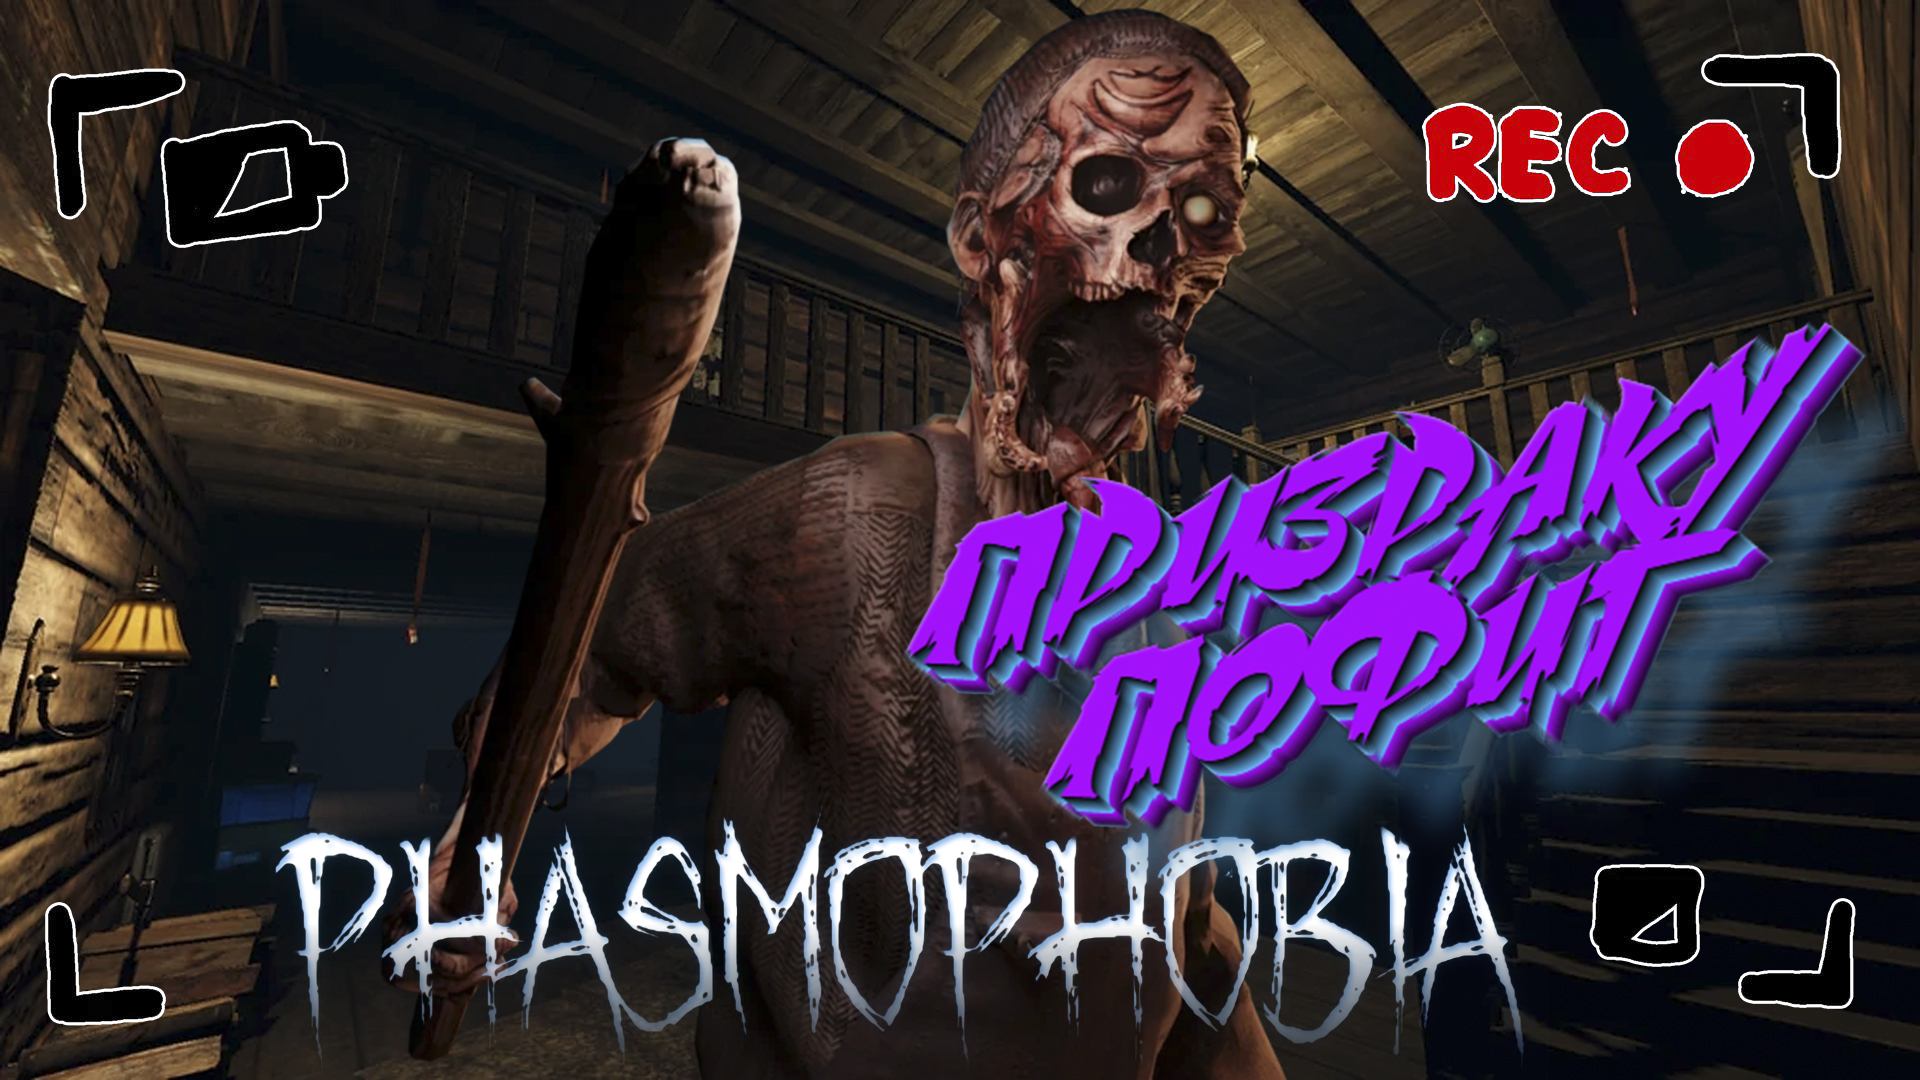 Phasmophobia in minecraft by neomc фото 110